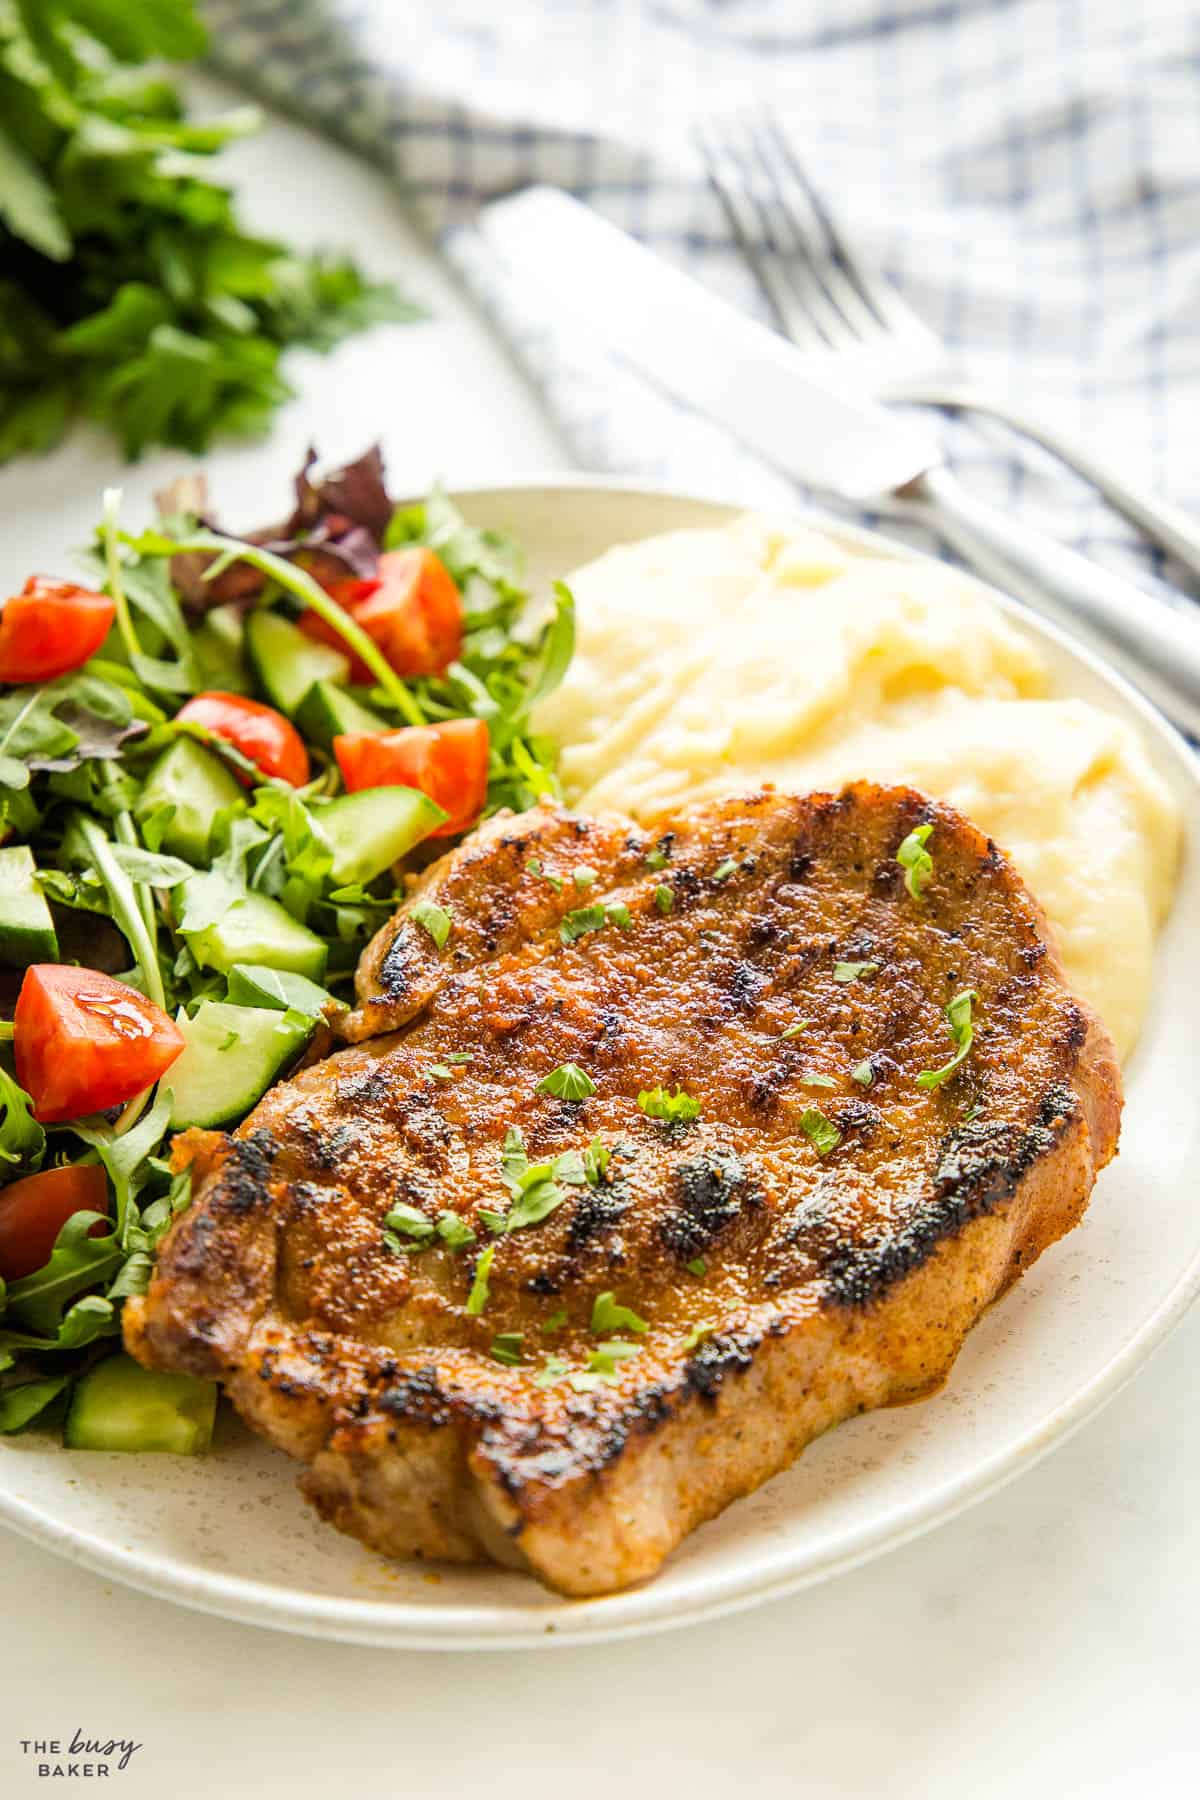 grilled pork steak or boston butt on white plate with salad and mashed potatoes